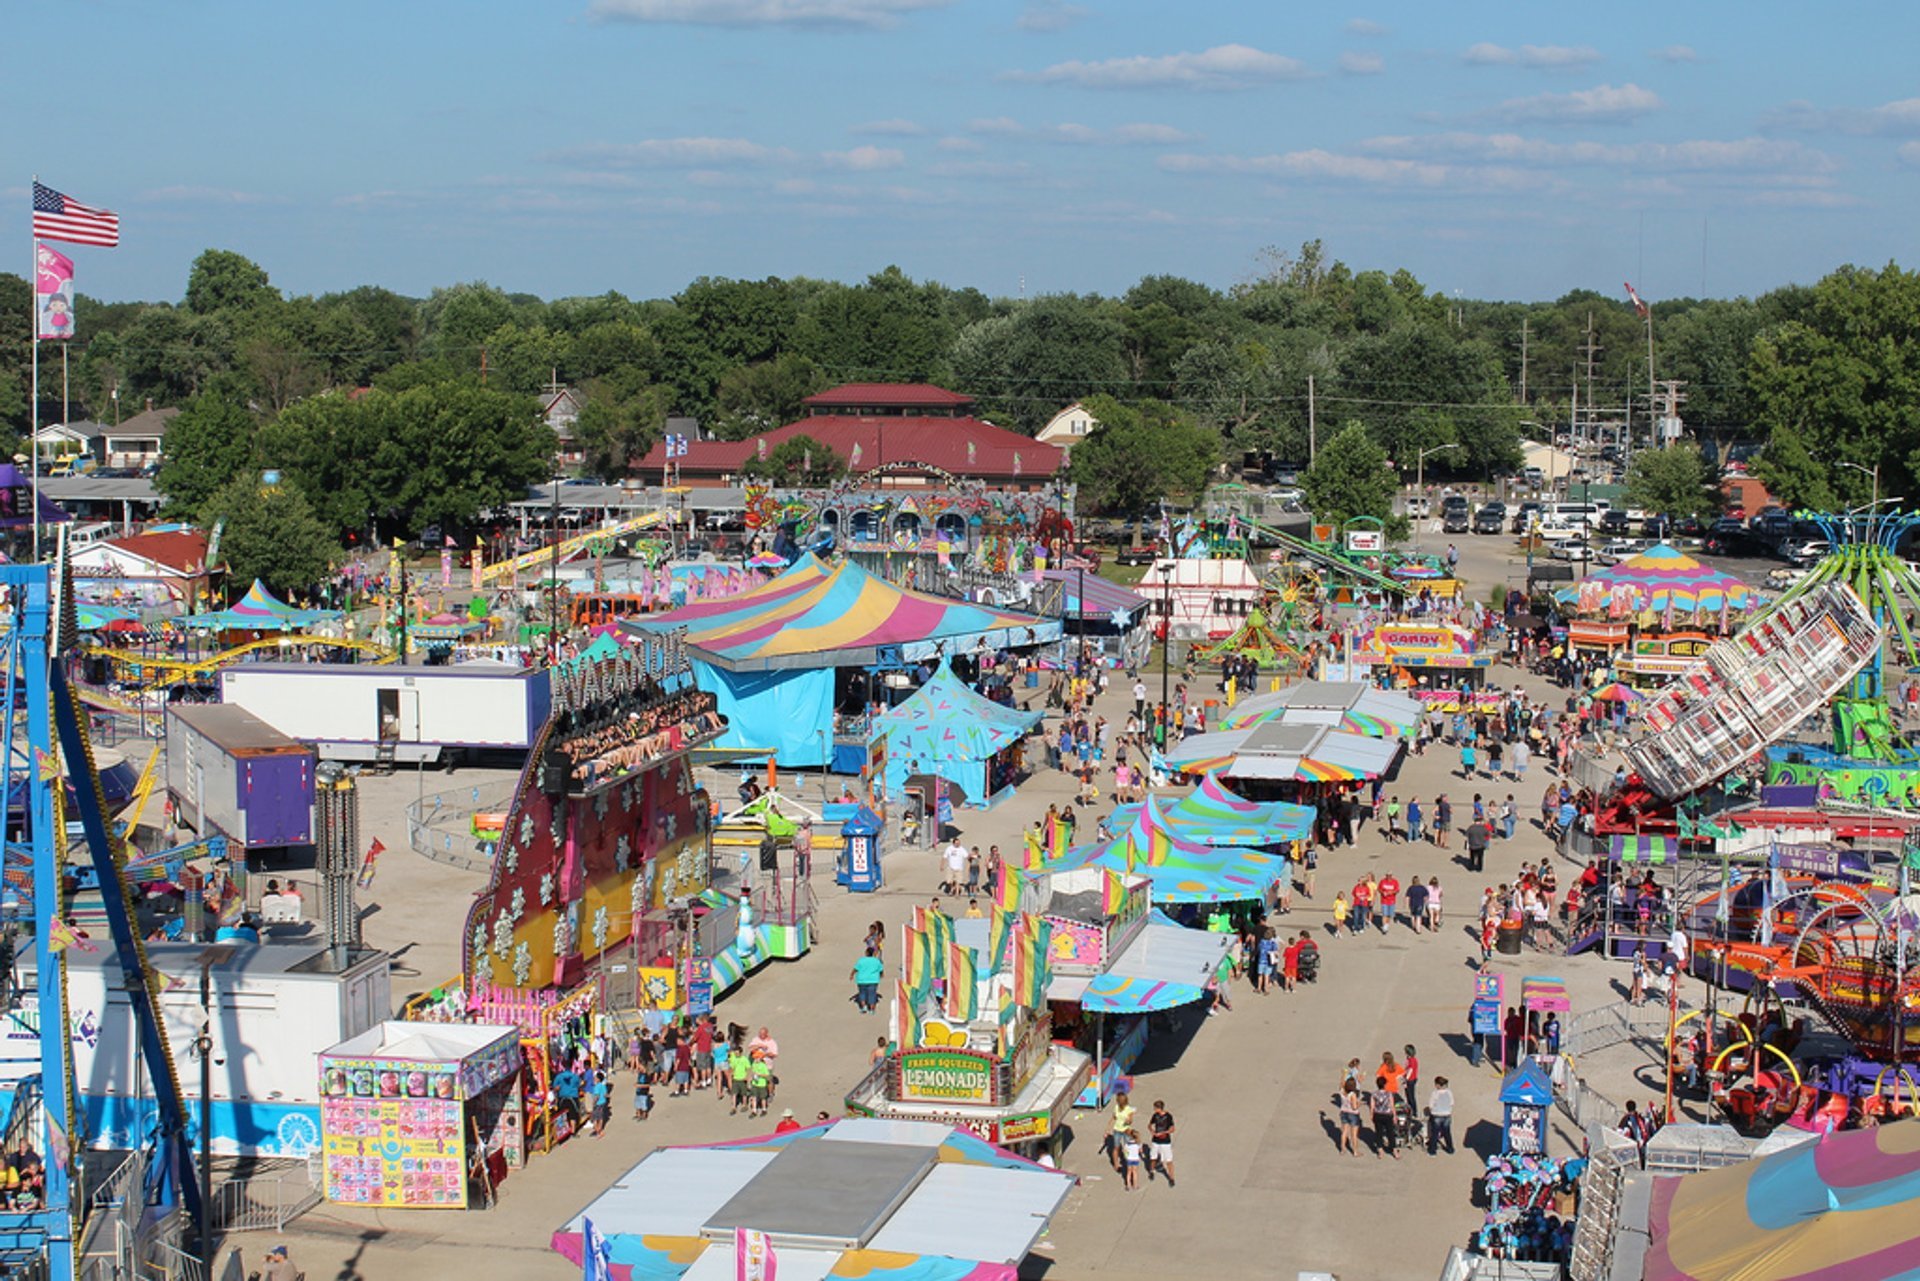 Illinois State Fair 2022 Schedule Illinois State Fair 2022 In Midwest - Dates